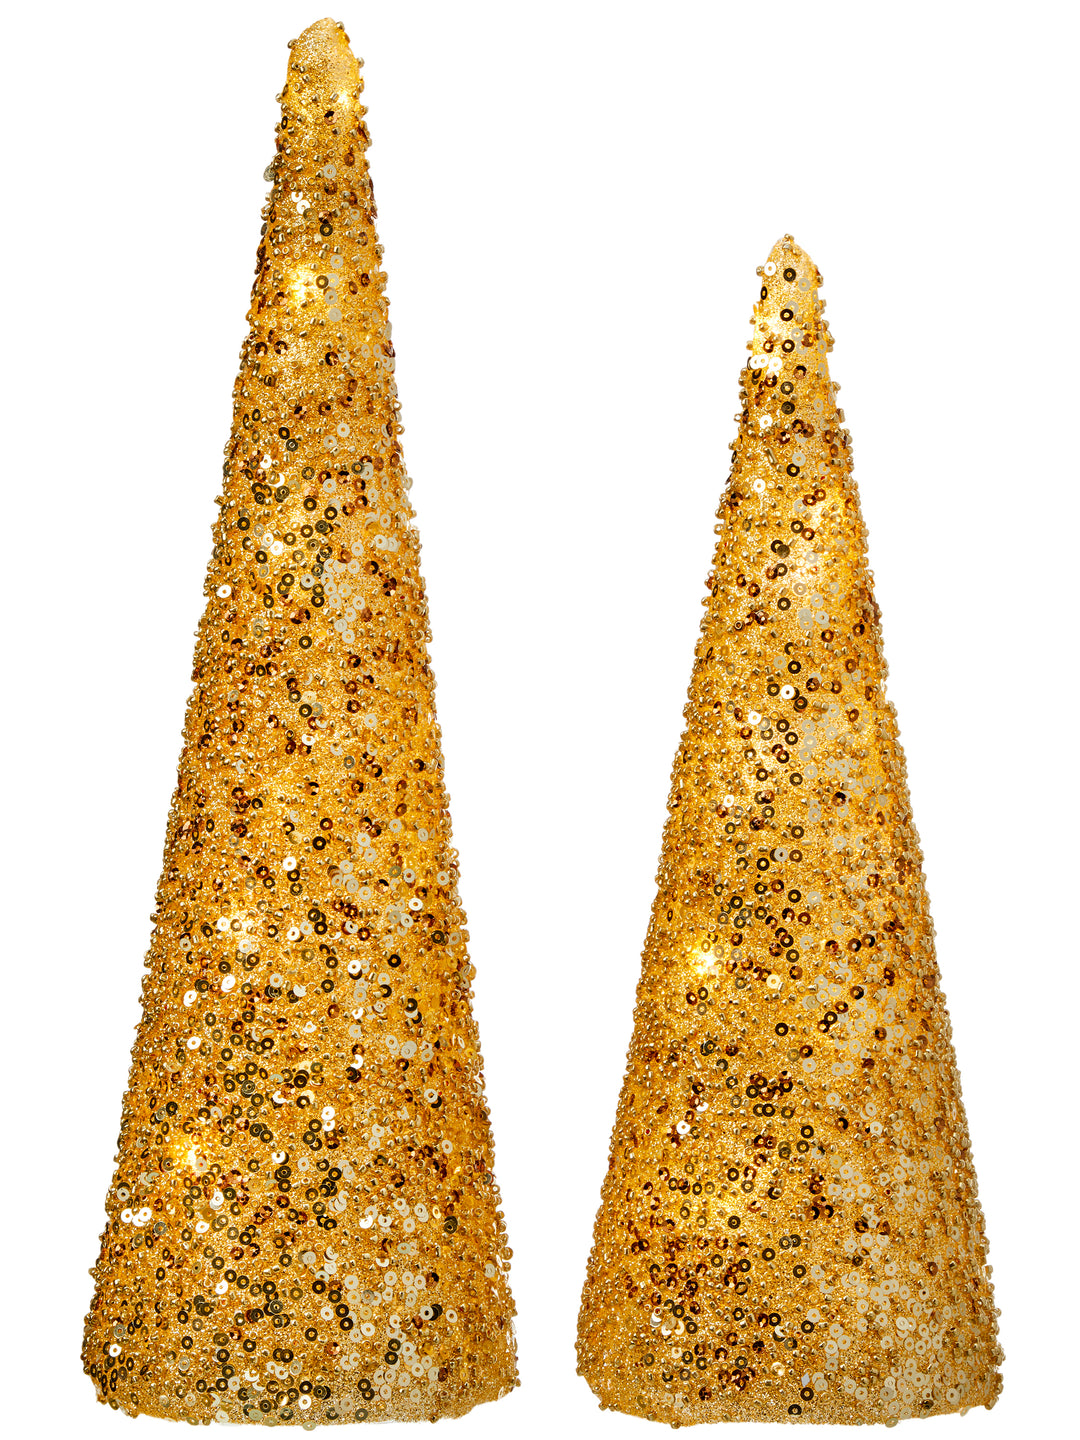 Regency 10/12" Jewel Cone Tree set of 2 - LED Battery Operated in Gold